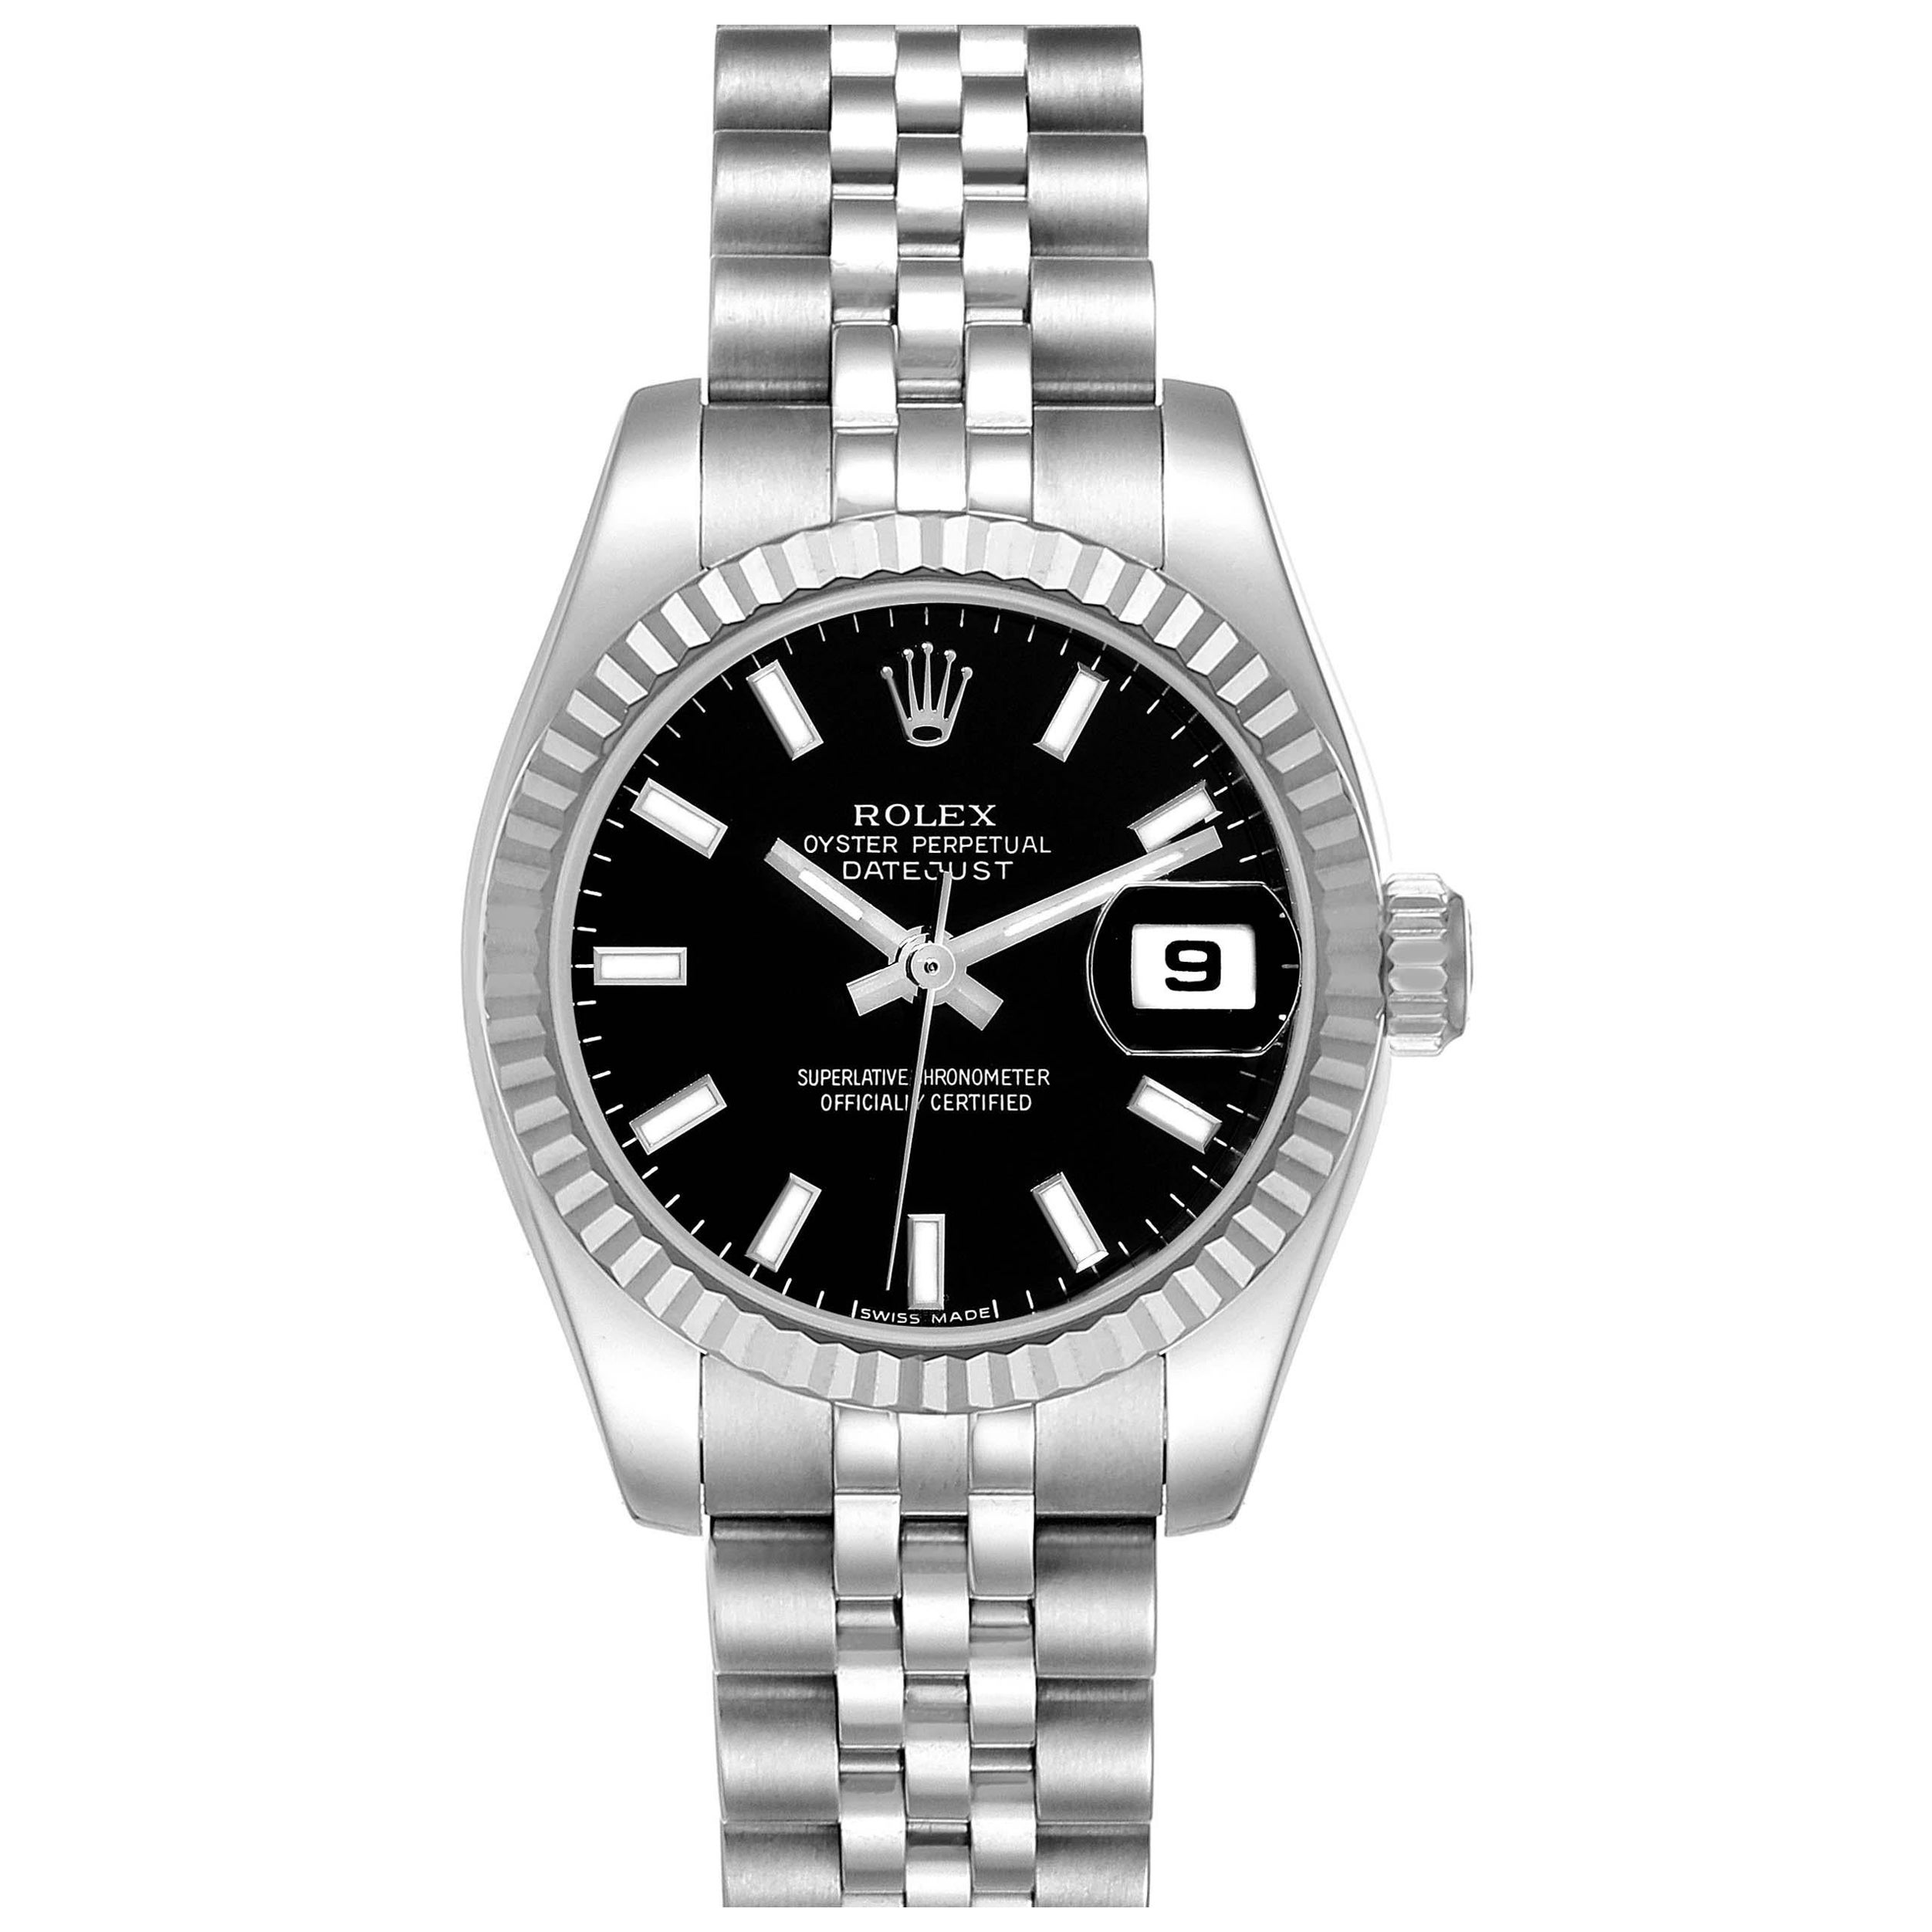 Rolex Datejust Steel White Gold Black Dial Ladies Watch 179174 Box Card For Sale